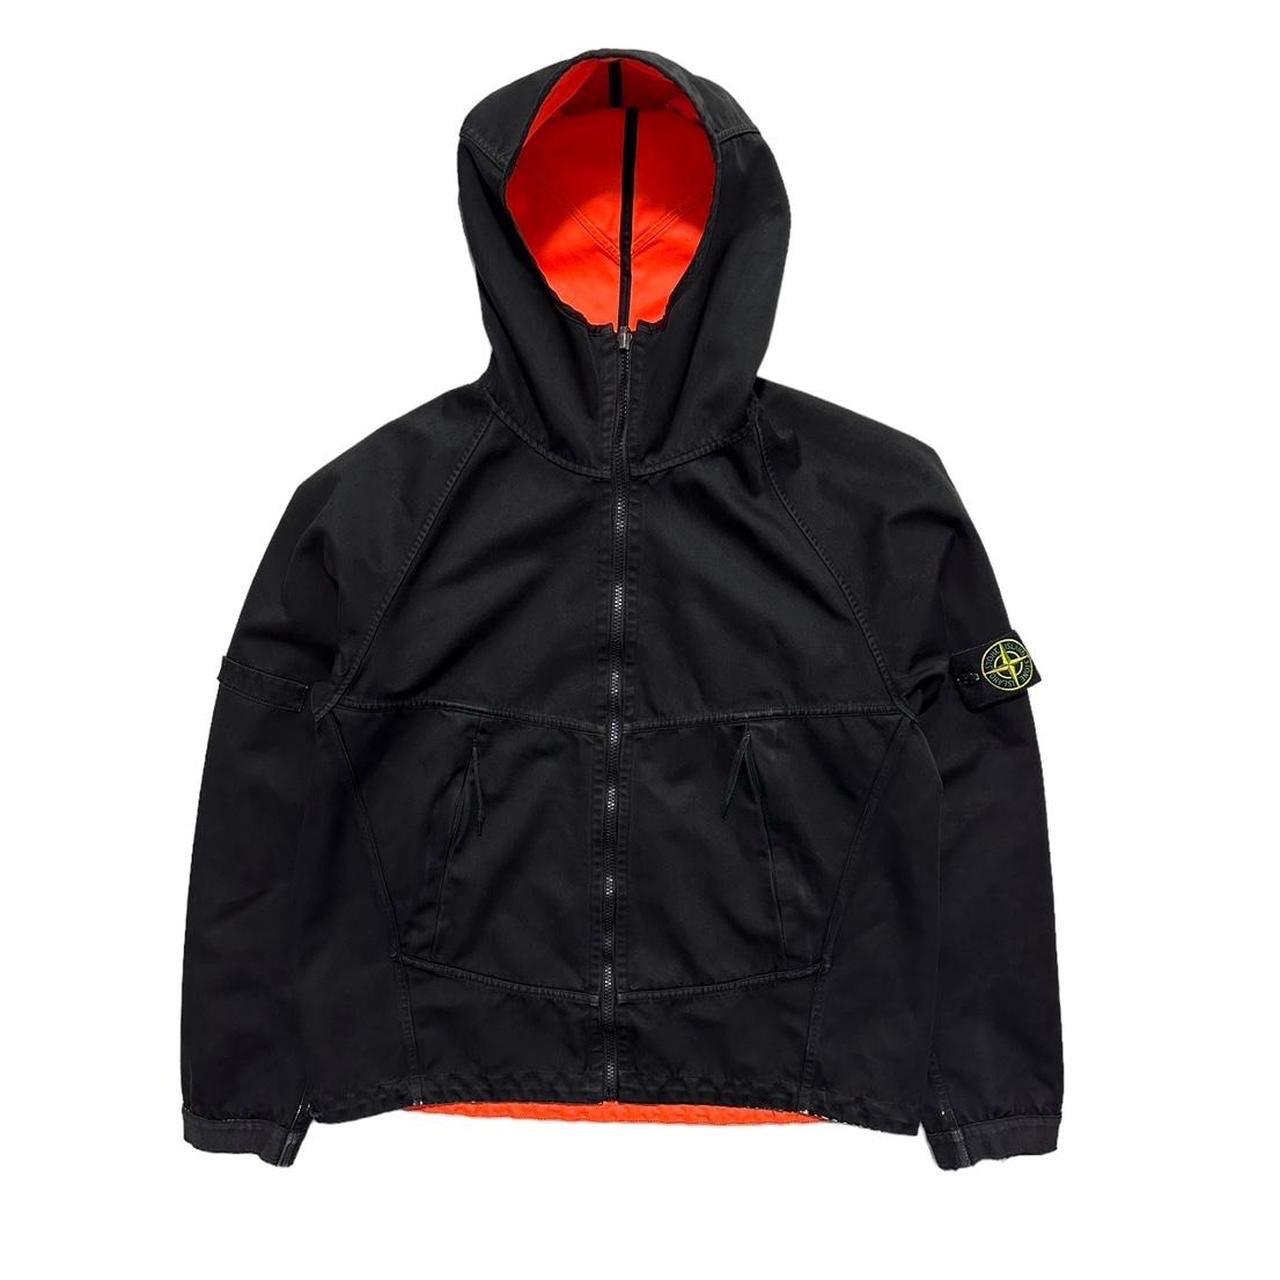 Stone Island A/W 2006 Backprint Reversible Jacket - Known Source